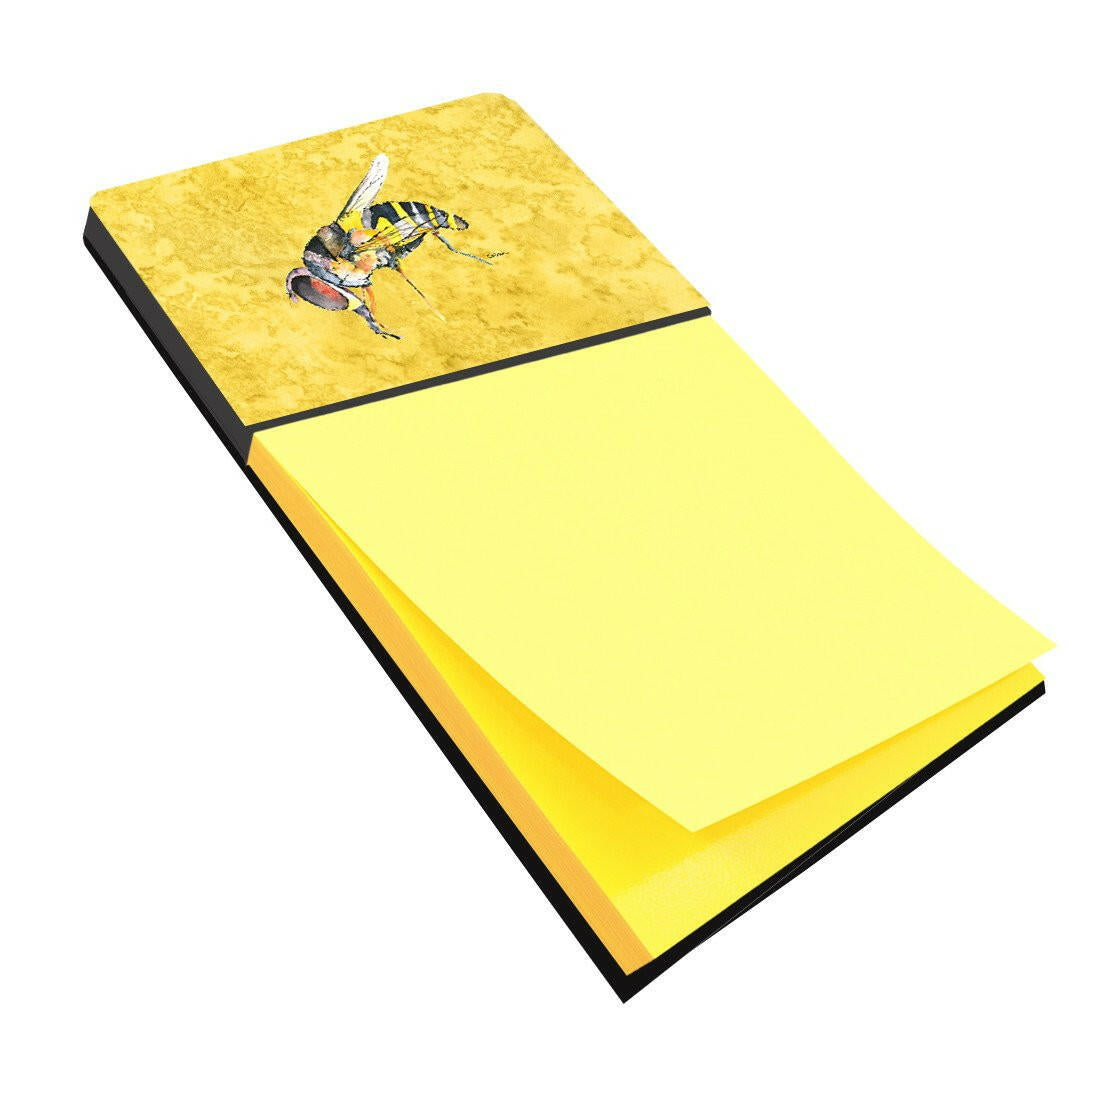 Bee on Yellow Refiillable Sticky Note Holder or Postit Note Dispenser 8851SN by Caroline's Treasures